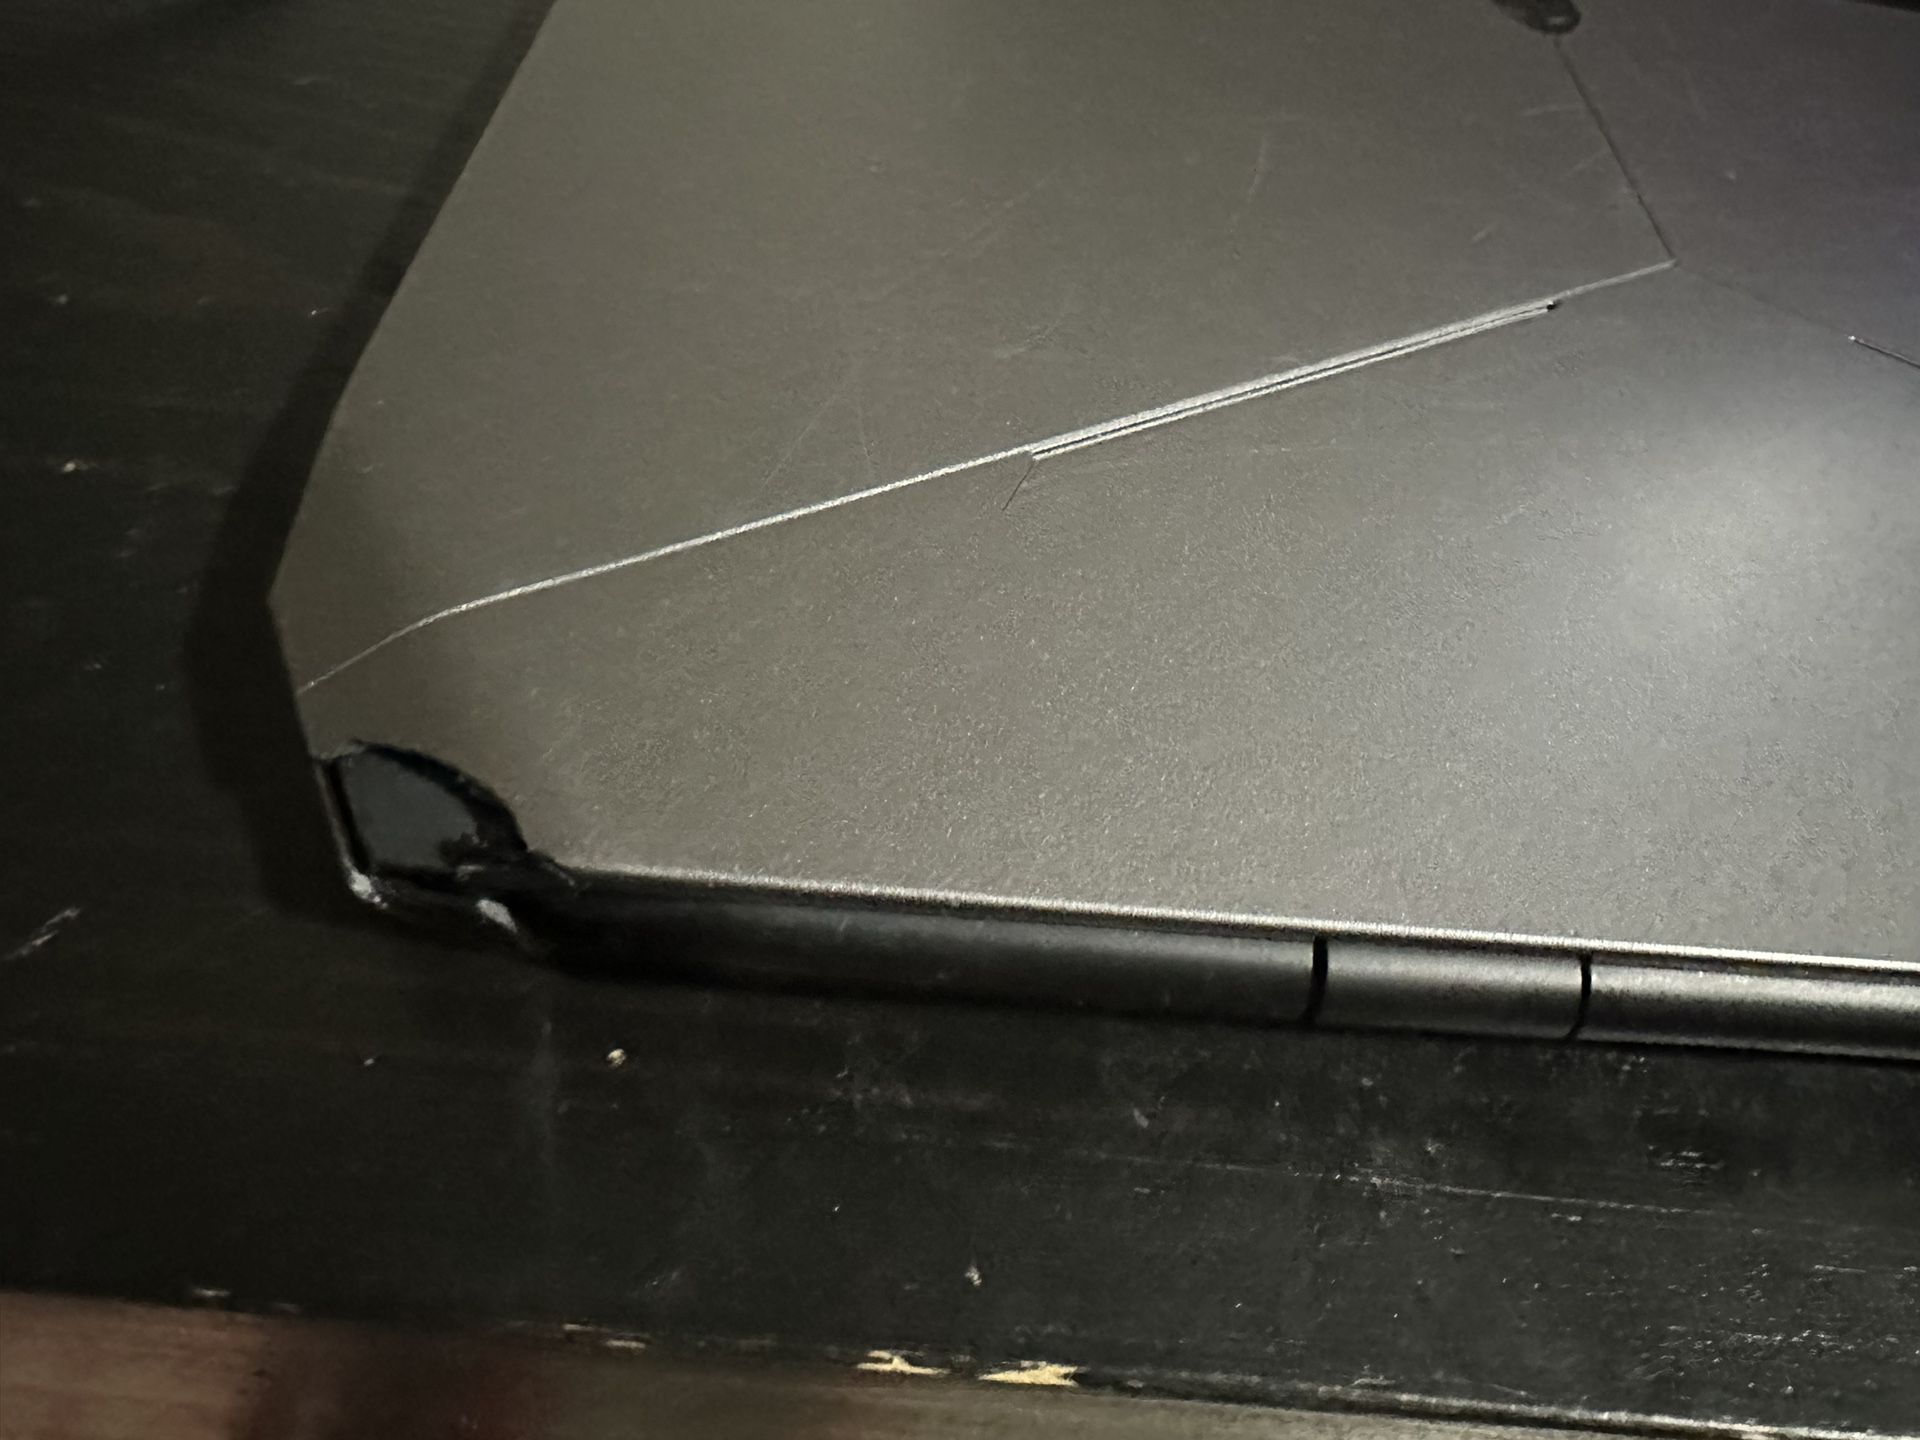 Alienware 13 R2 for Sale in Fountain Valley, CA - OfferUp